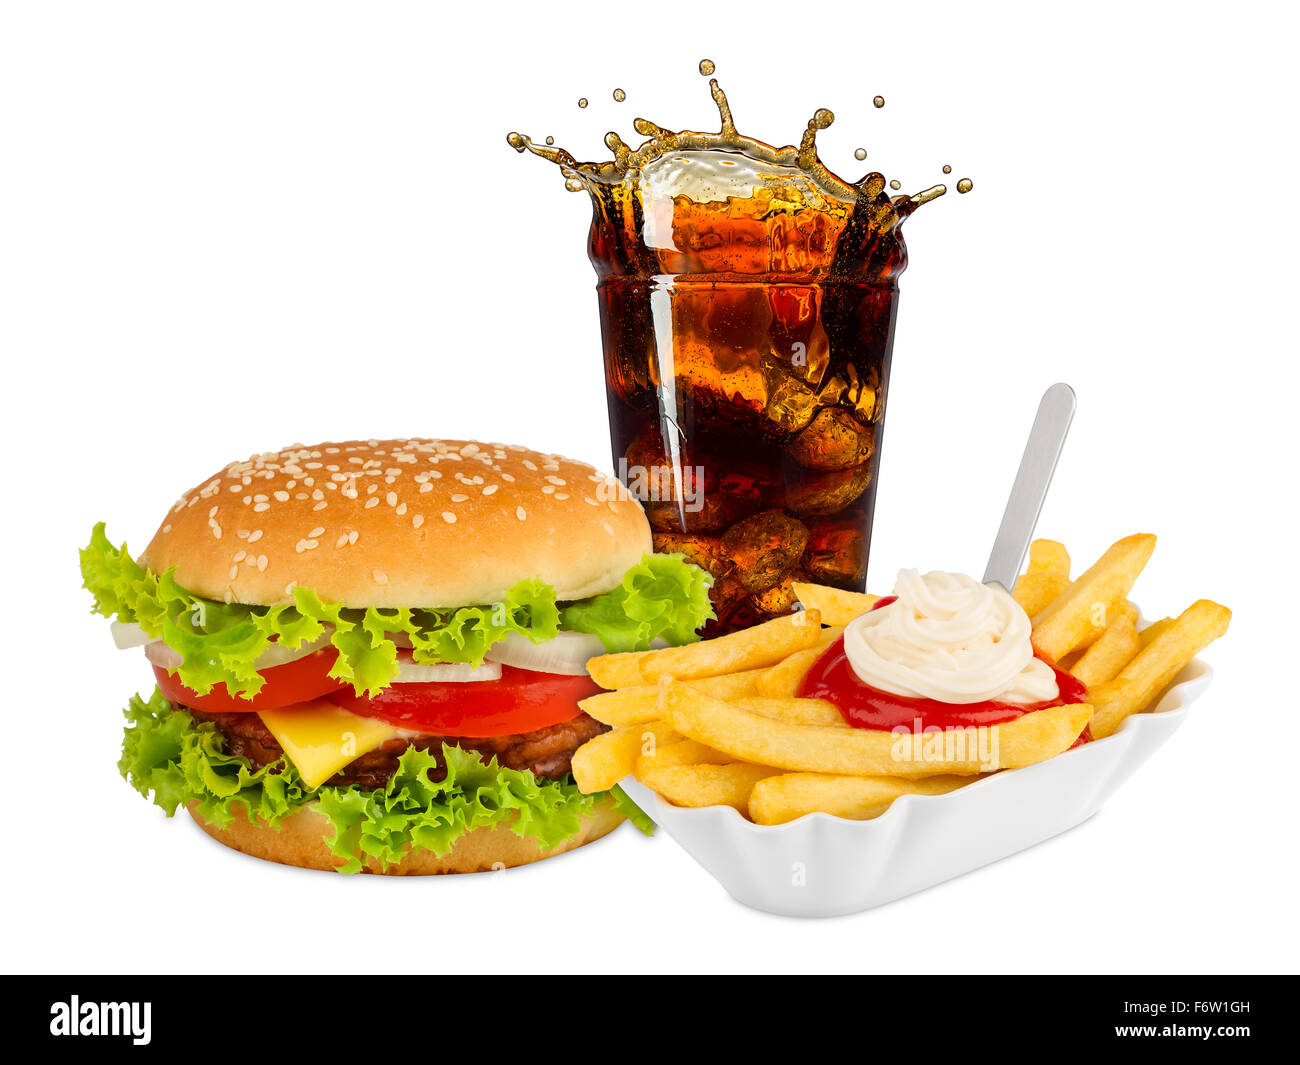 Fast food meal on white background Stock Photo